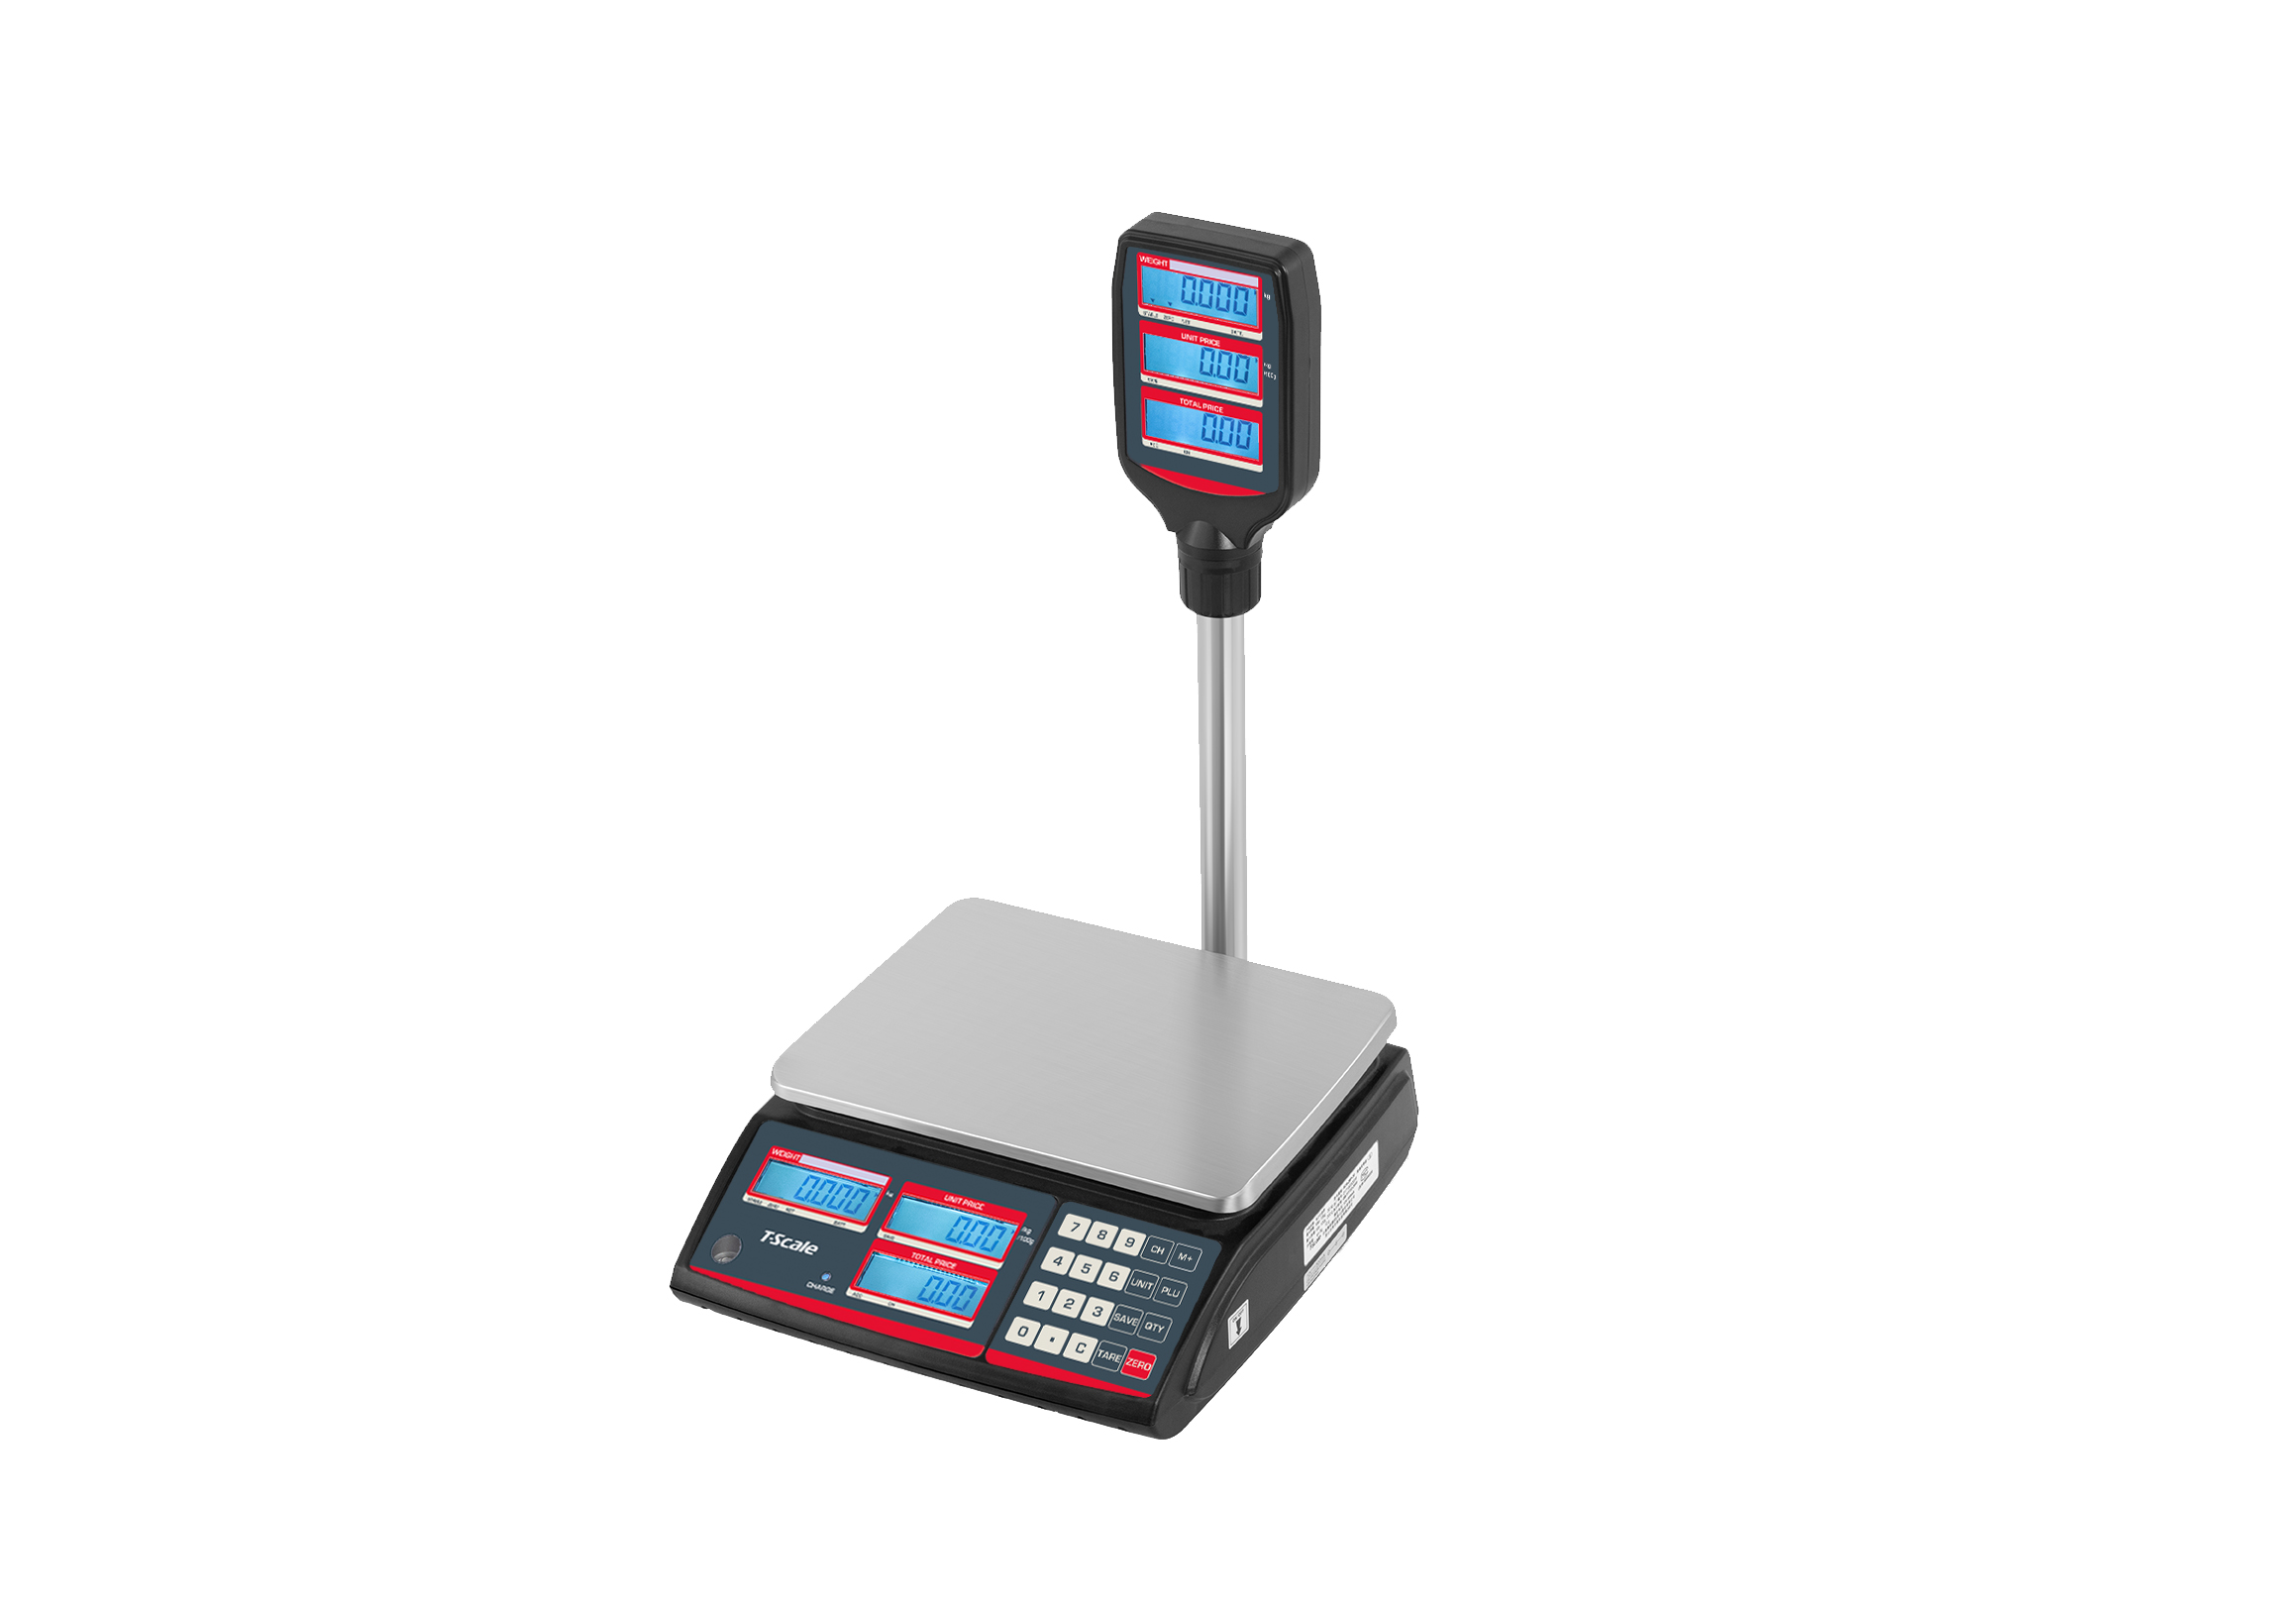 Understanding the Basics of Talking Scales: A Comprehensive Guide - TSEC -  Chinese Household Electronic Scale Supplier, Manufacturer